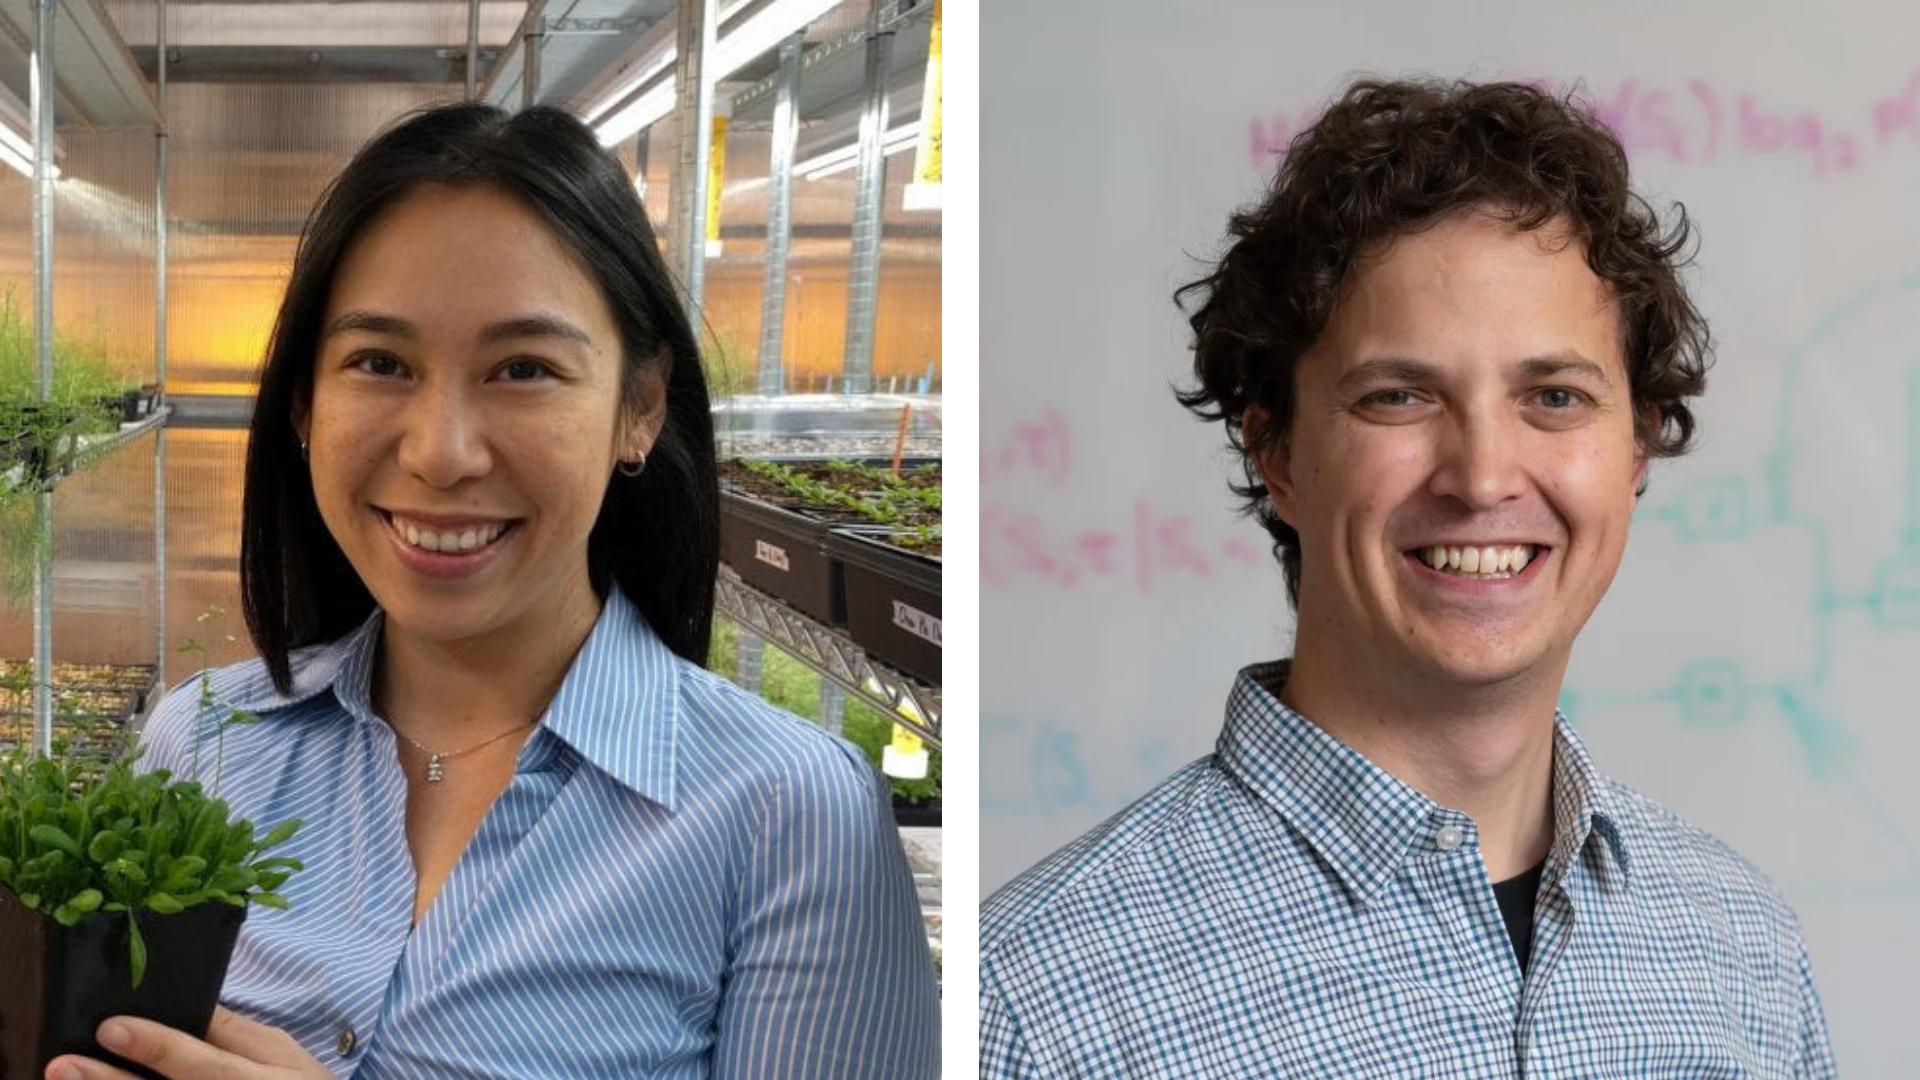 Lily Cheung and Simon Sponberg have been awarded Curci Grants to support their cutting-edge research.
